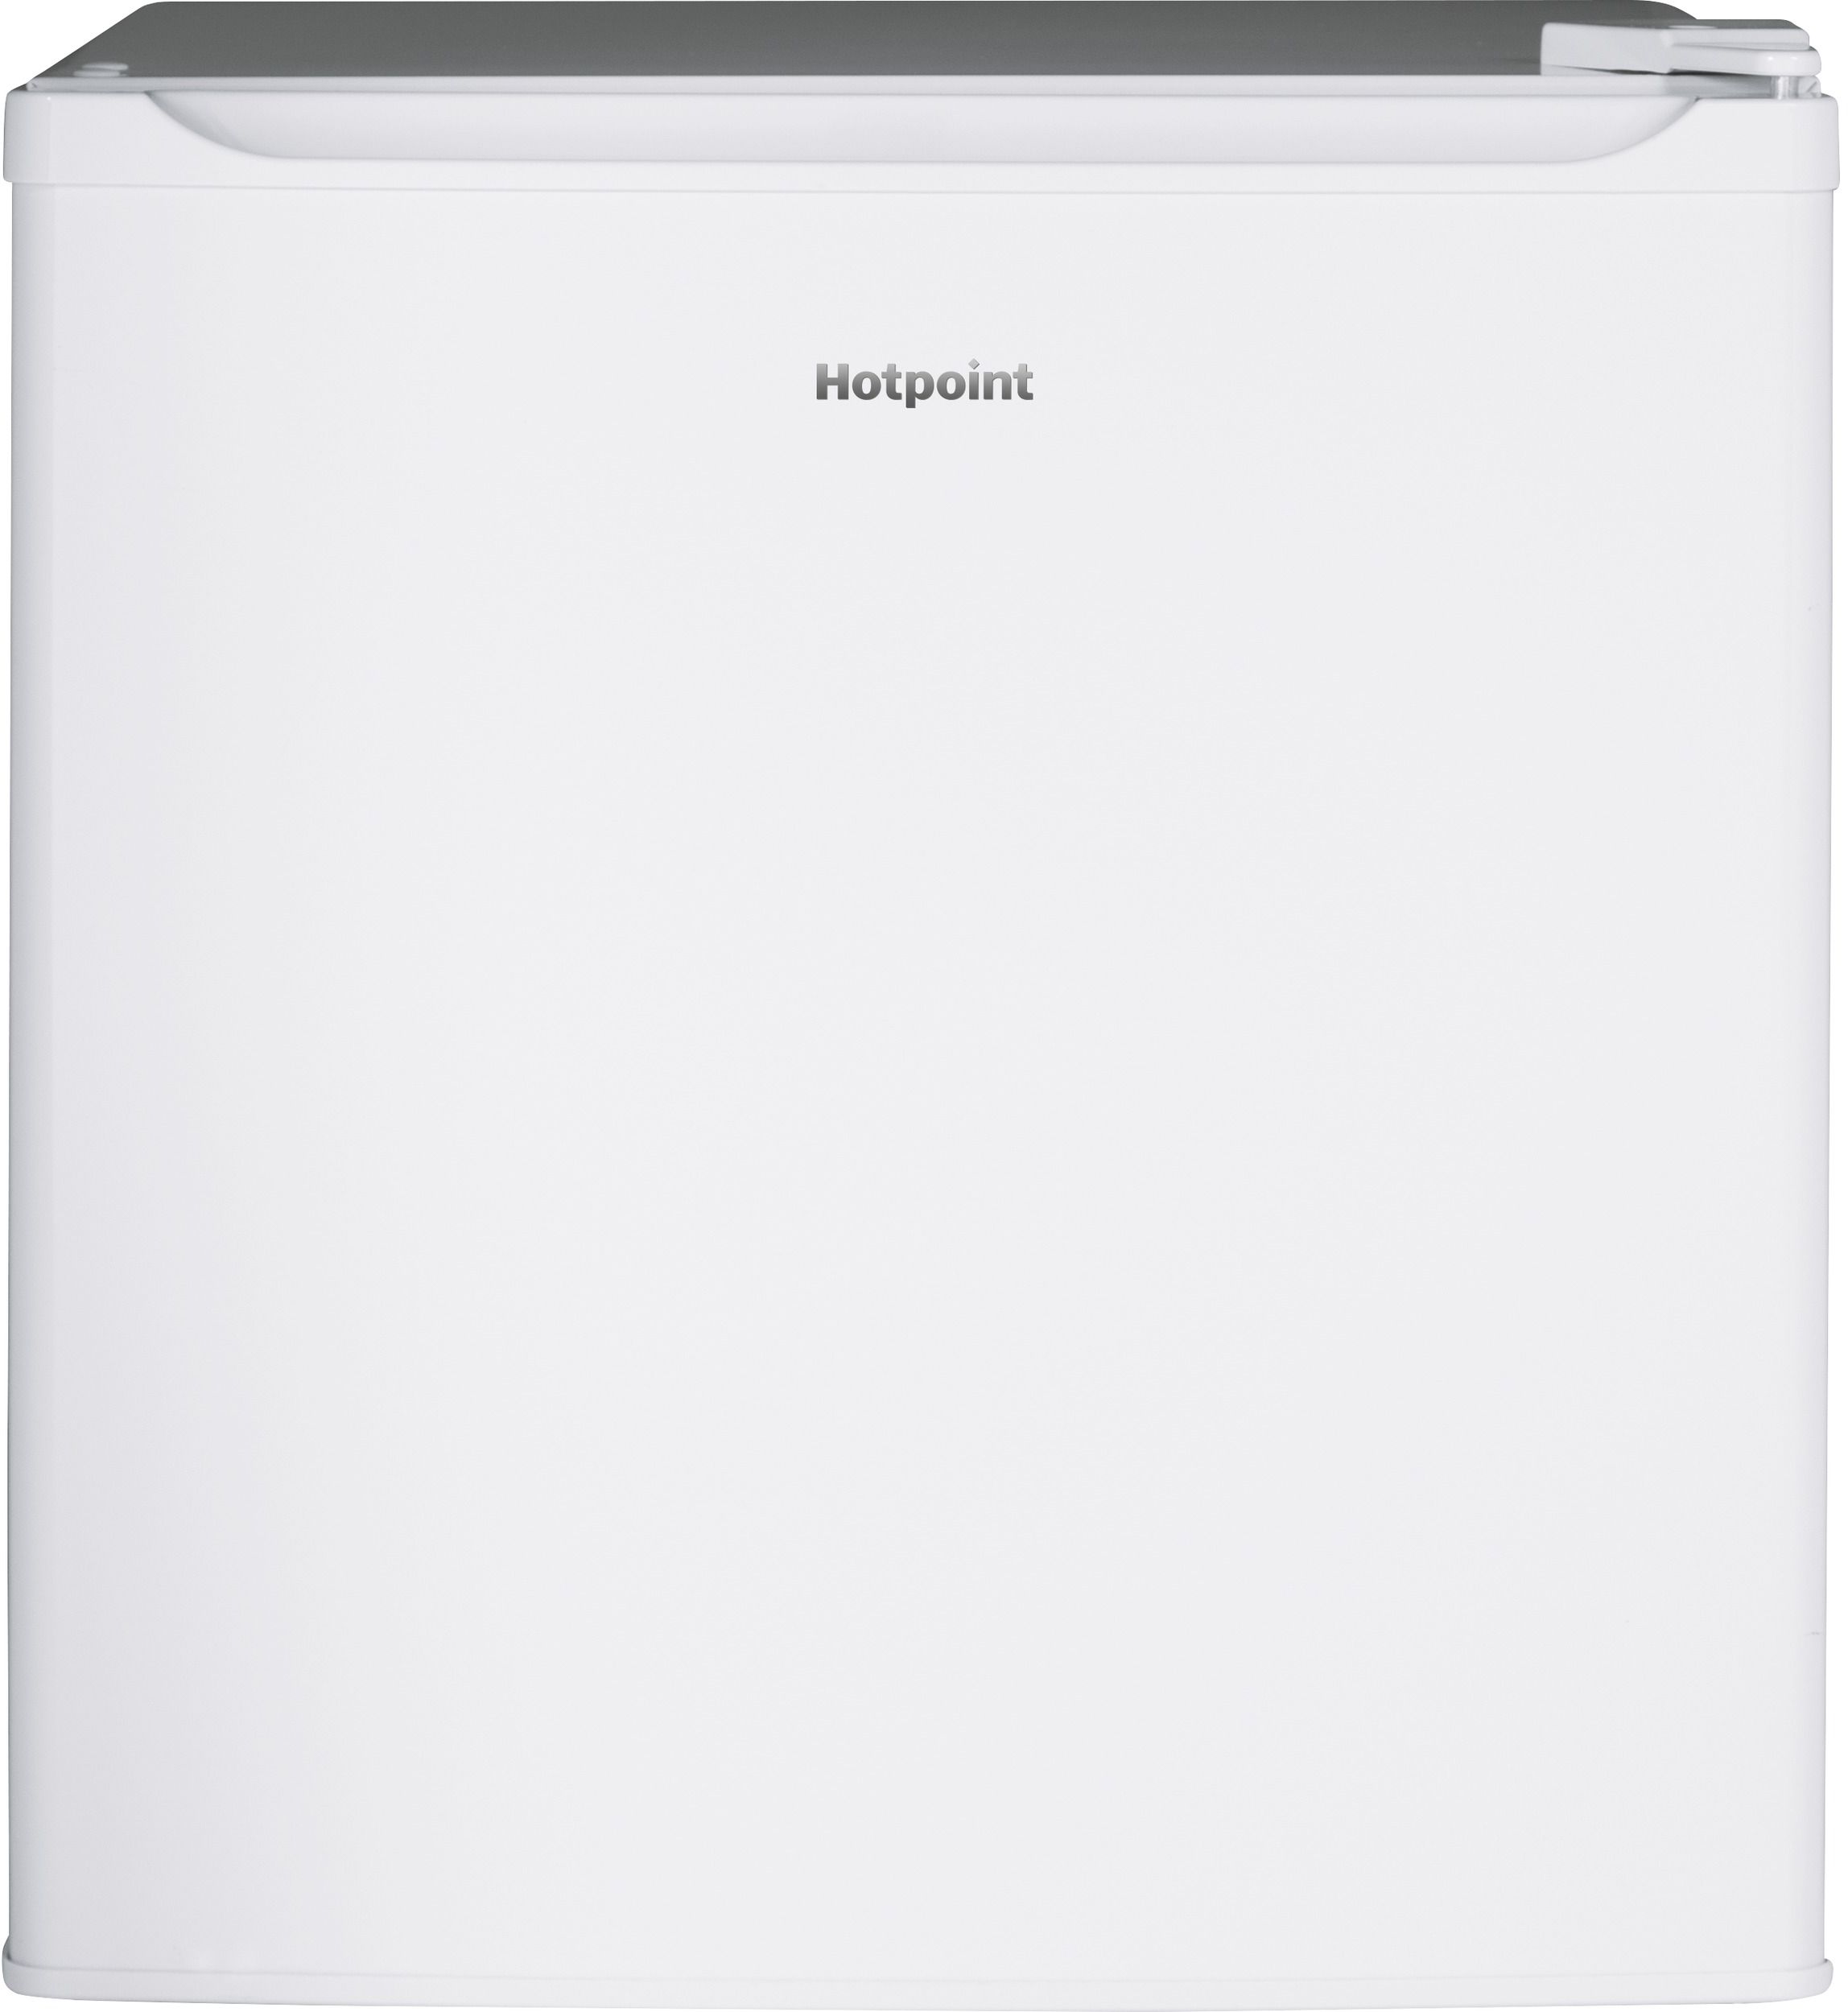 Hotpoint® 1.7 Cu. Ft. White Compact Refrigerator-HME02GGMWW